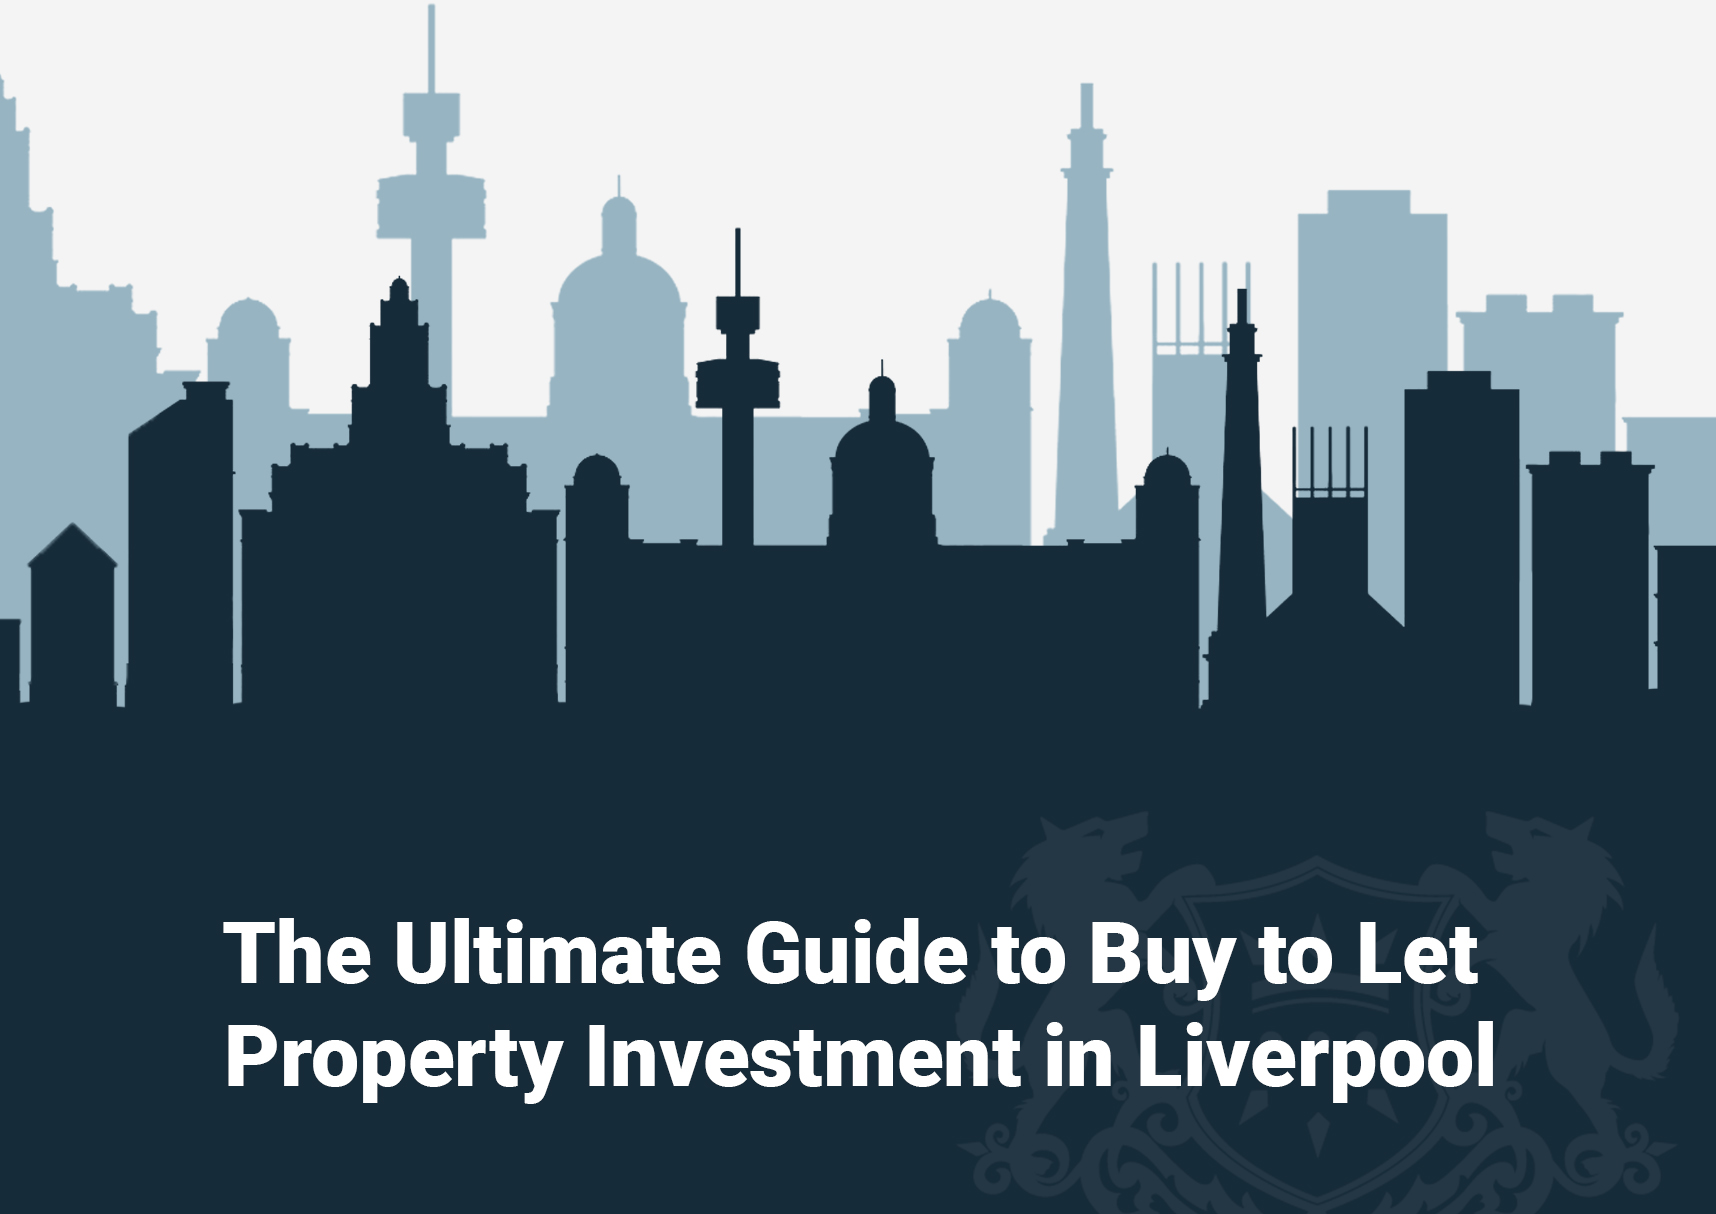 The Ultimate Guide to Buy to Let Property Investment in Liverpool